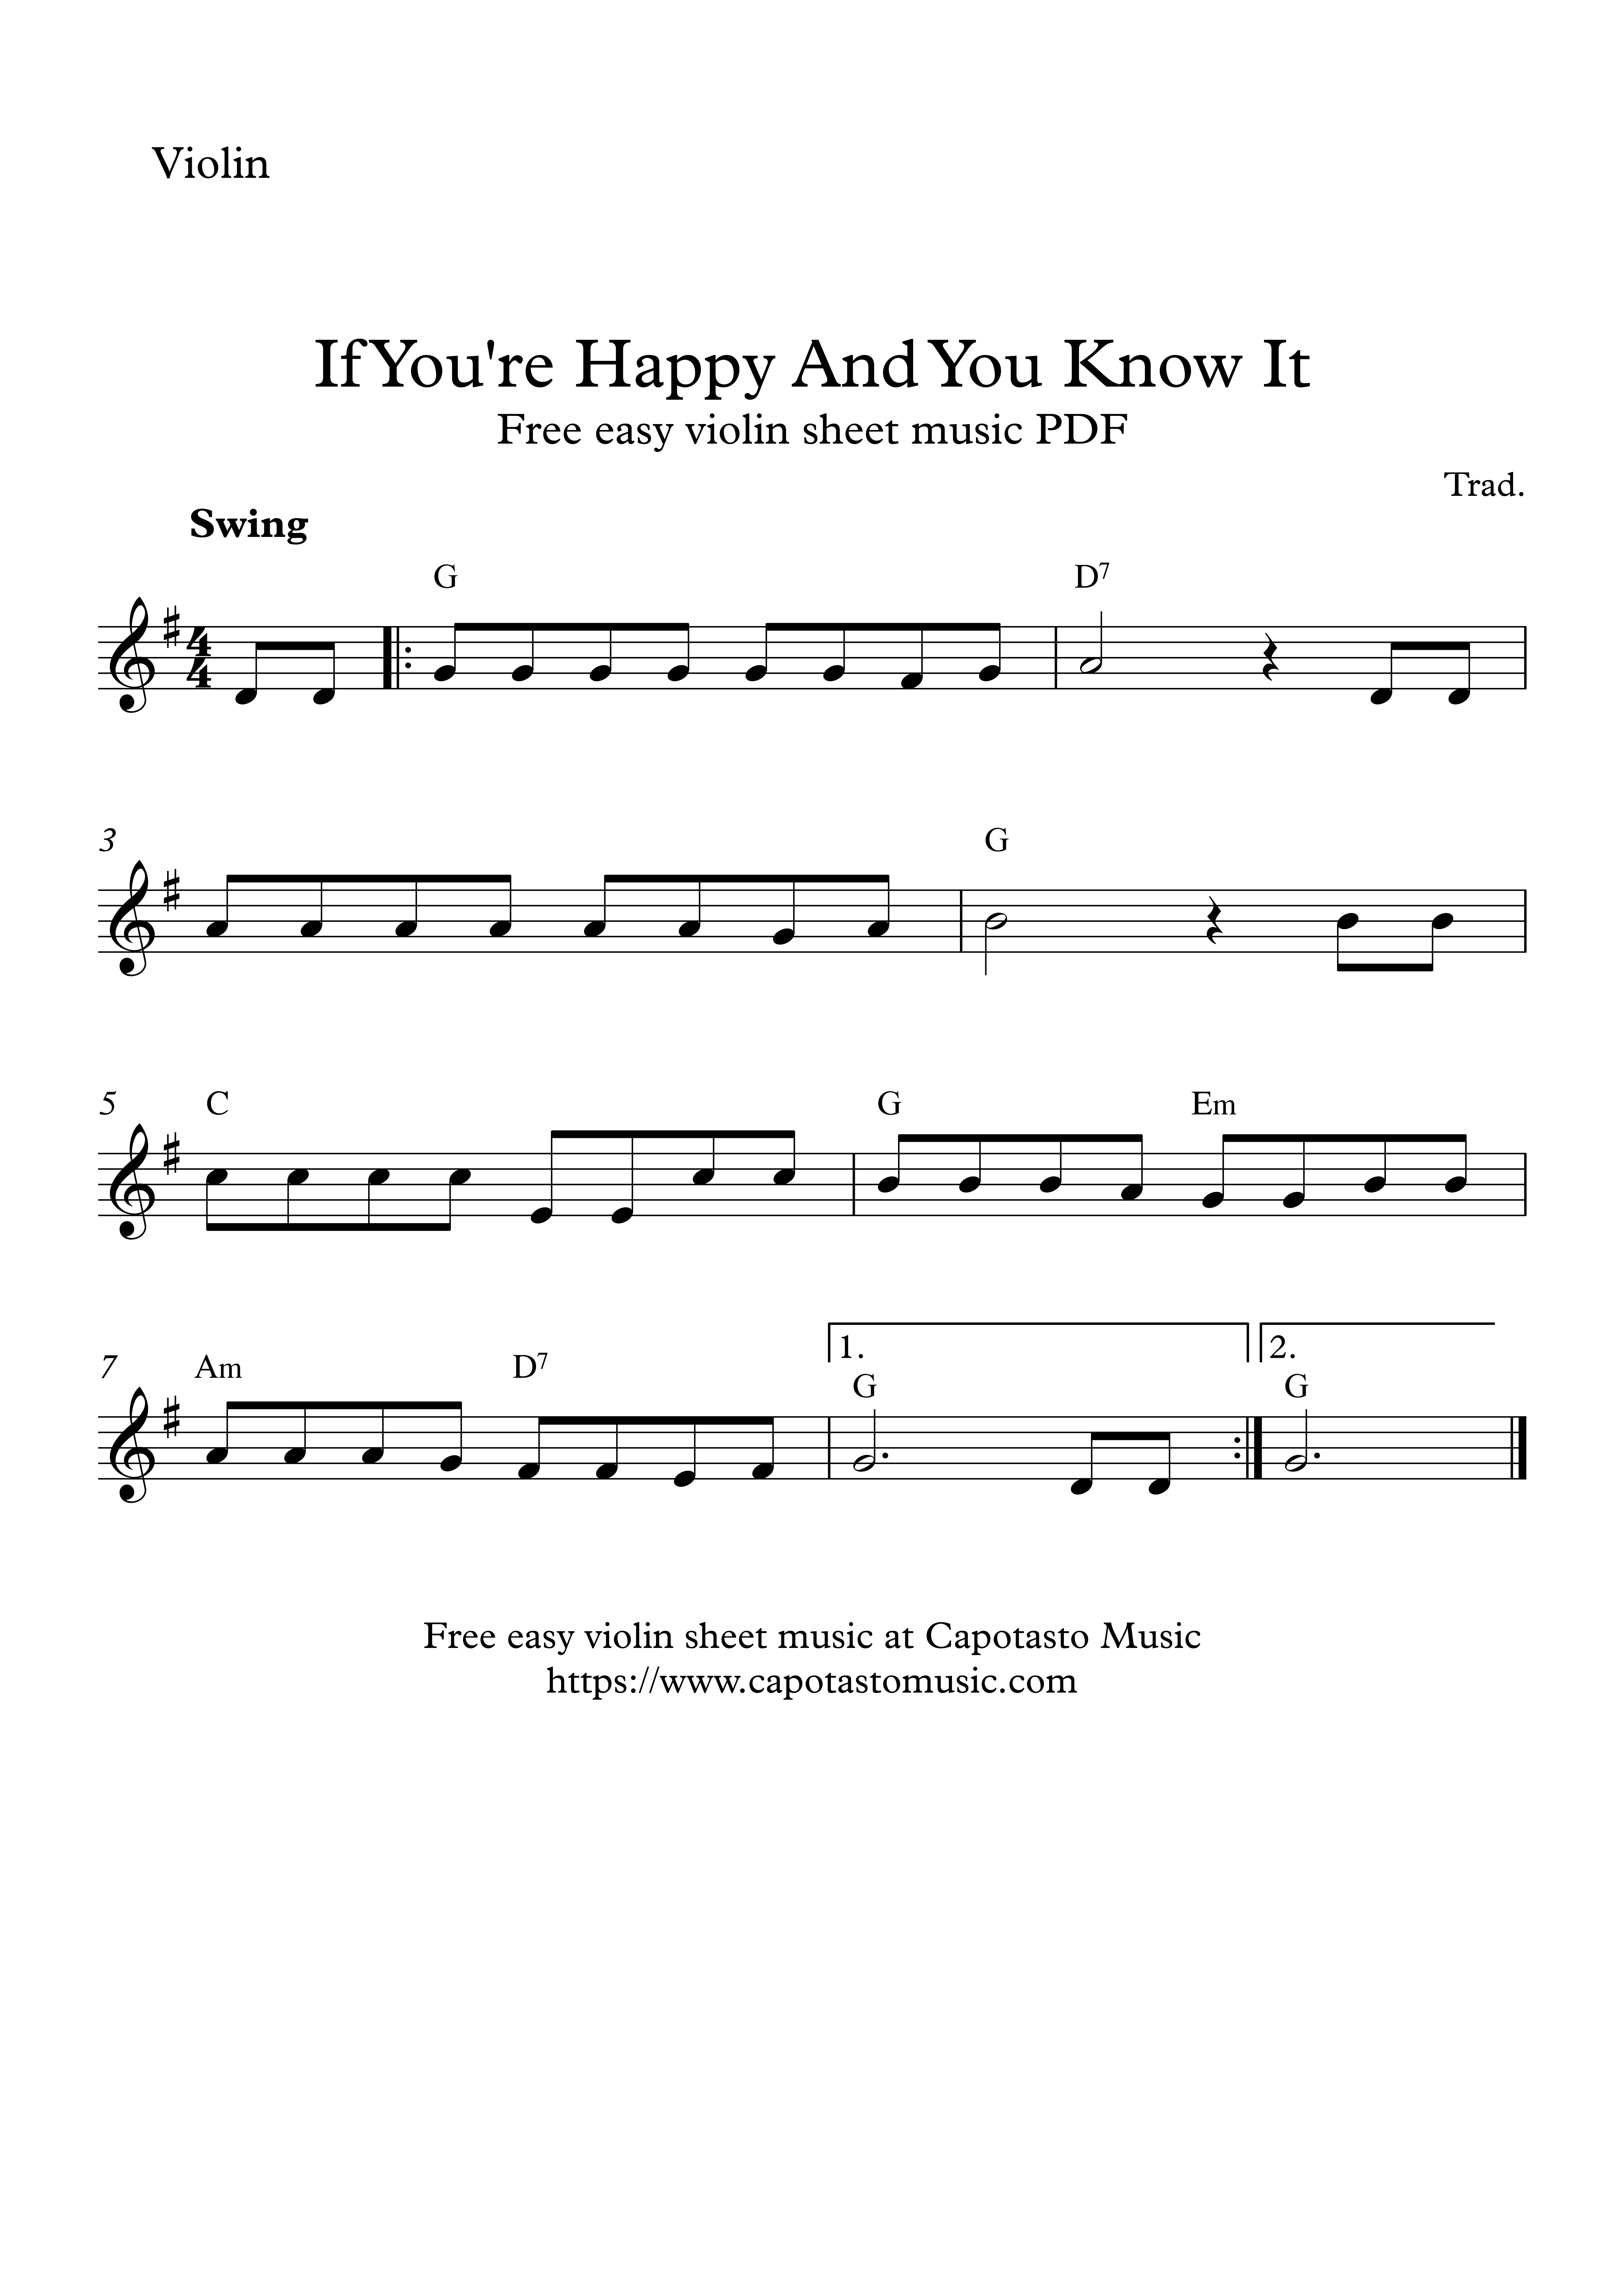 if-you-re-happy-and-you-know-it-free-easy-violin-sheet-music-for